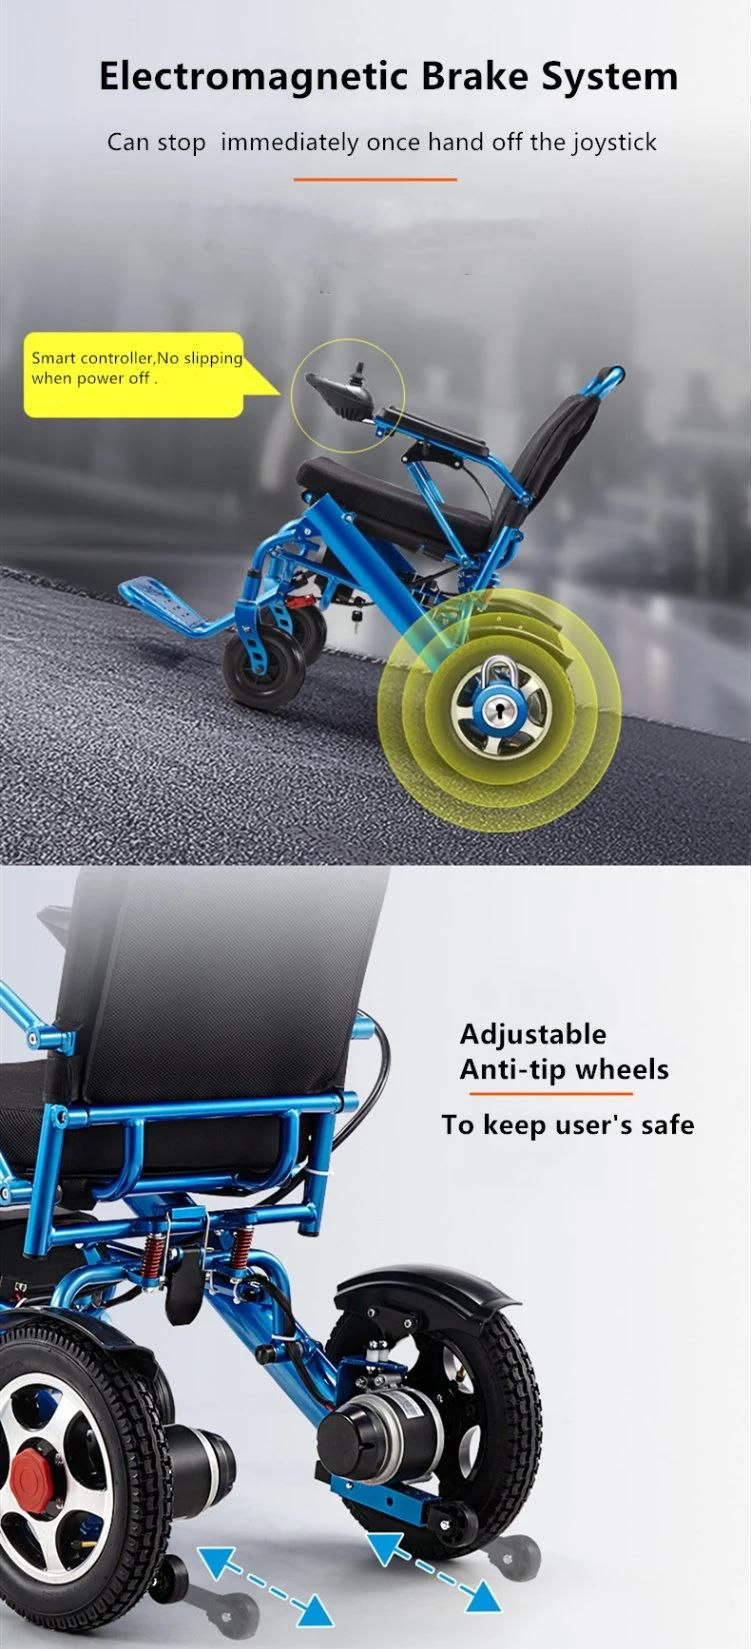 Portable Folding Lightweight Electric Wheelchair with Lithium Battery